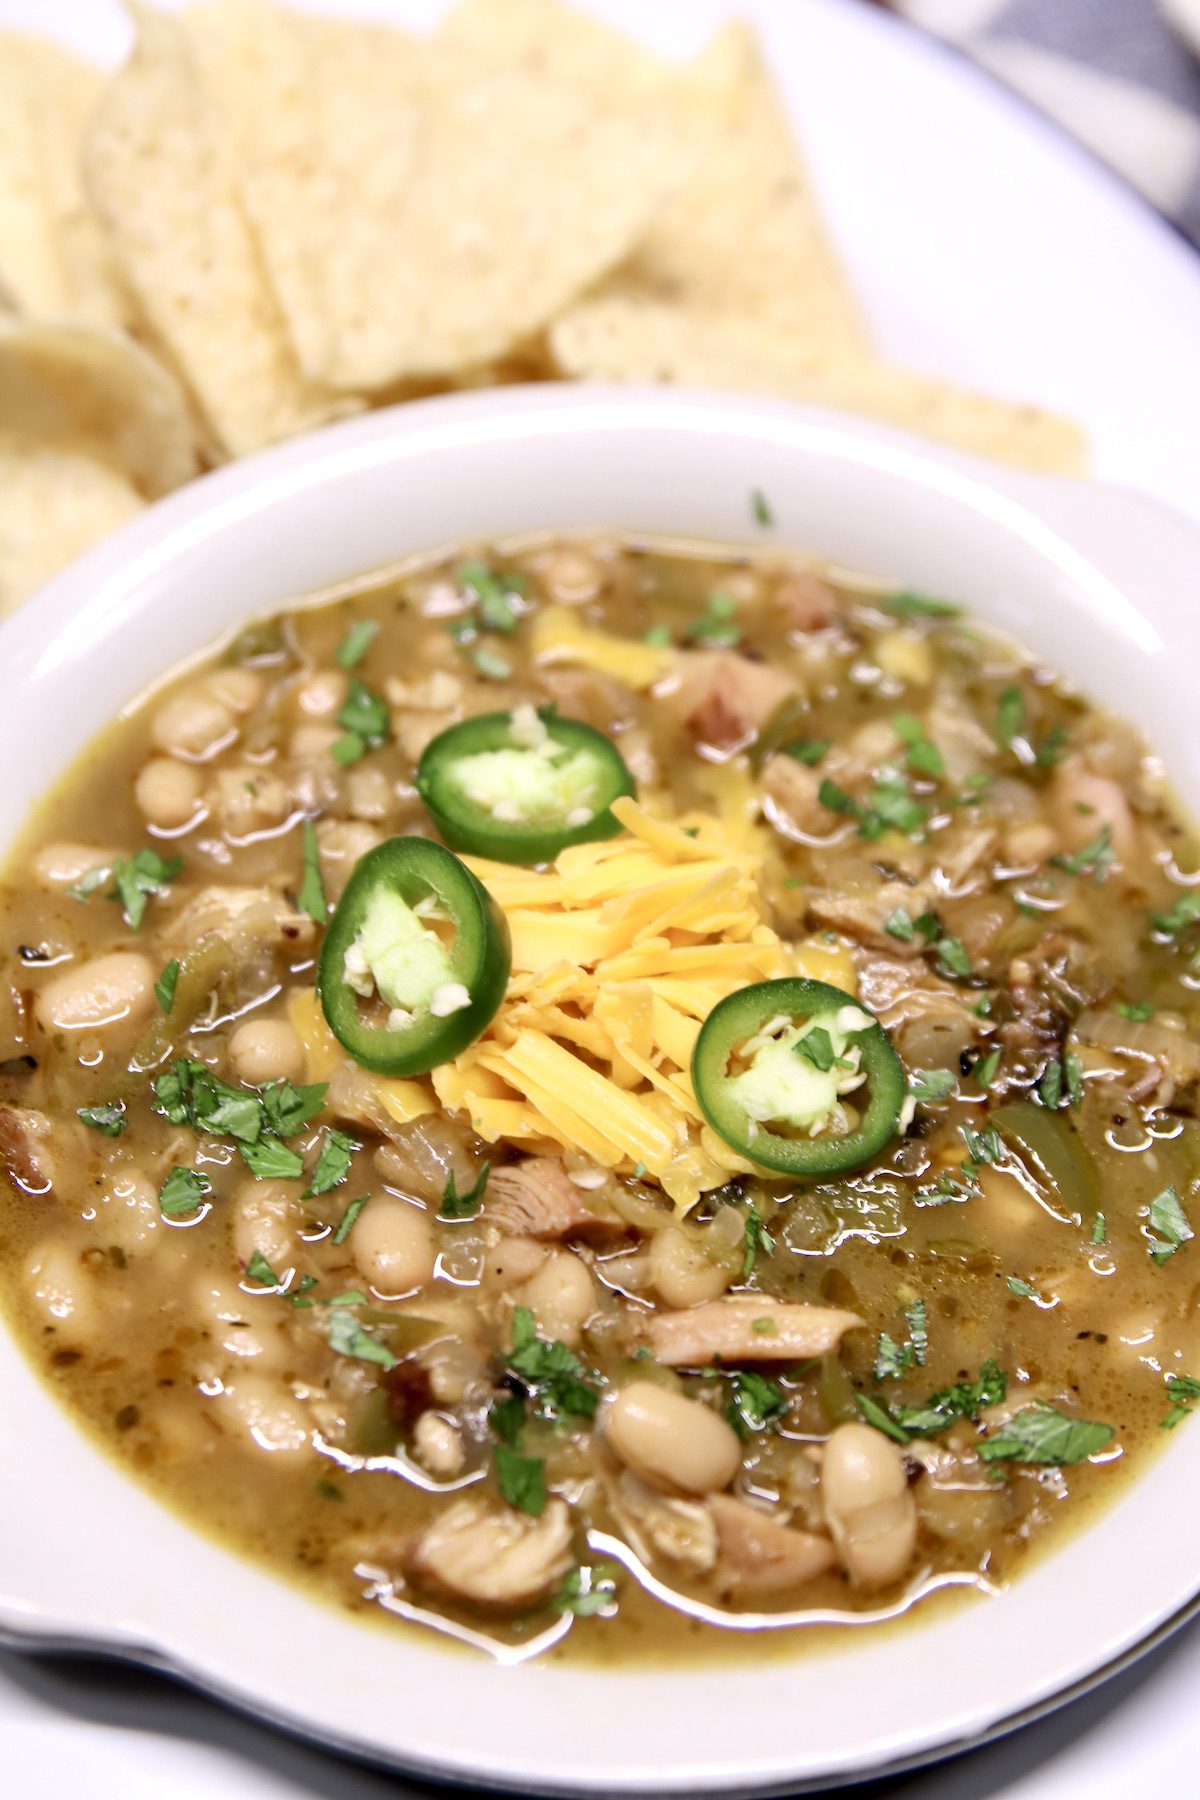 bowl of white bean chili with smoked chicken, tray with tortilla chips